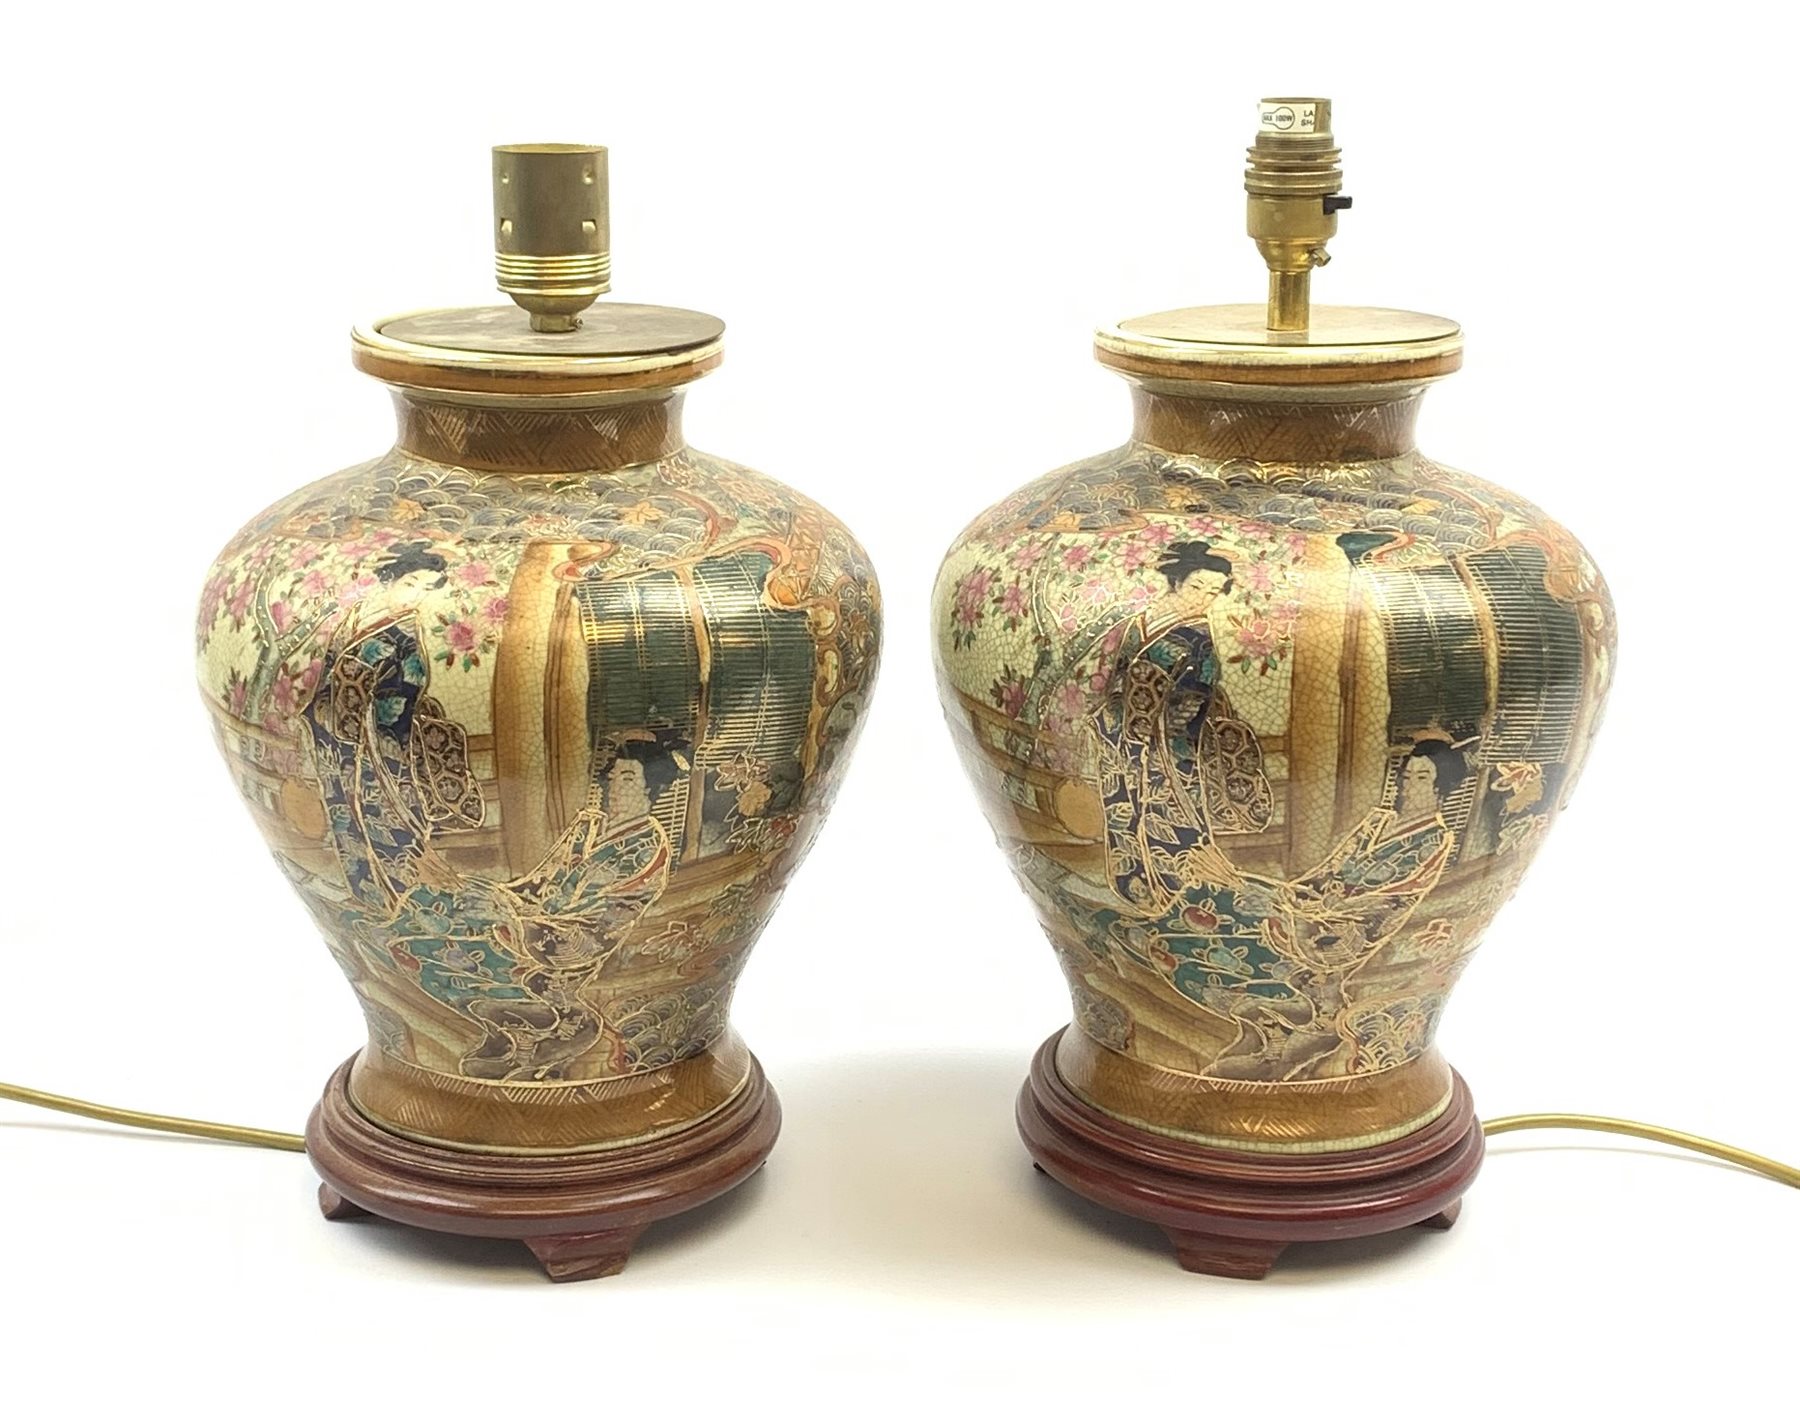 A pair of 20th century Japanese Satsuma style table lamps